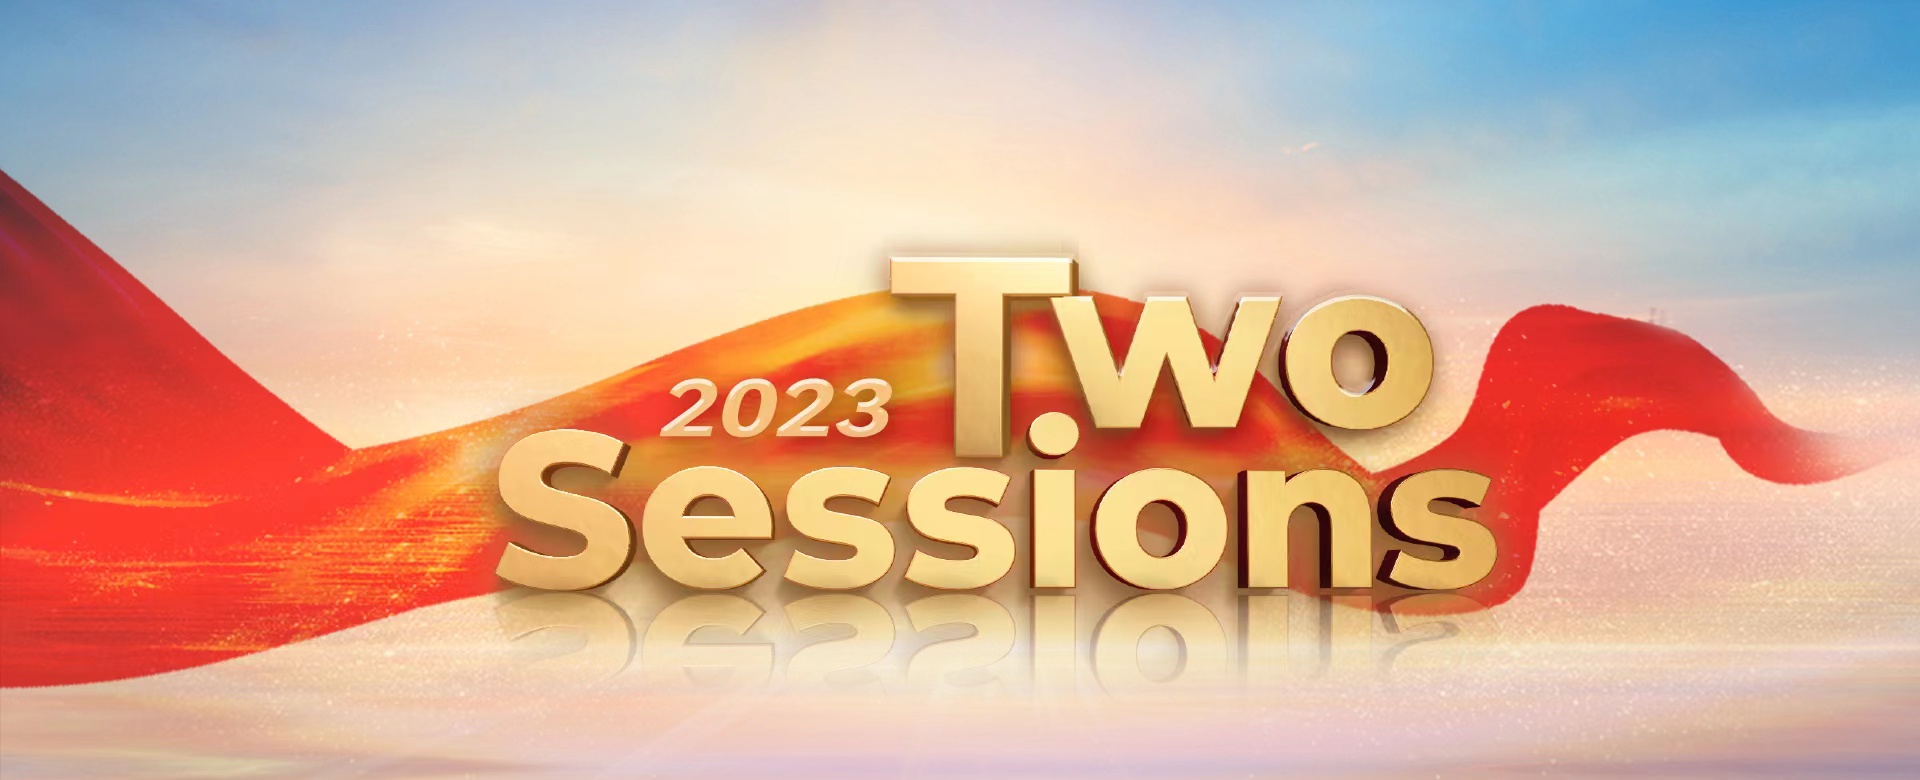 2023TwoSessions